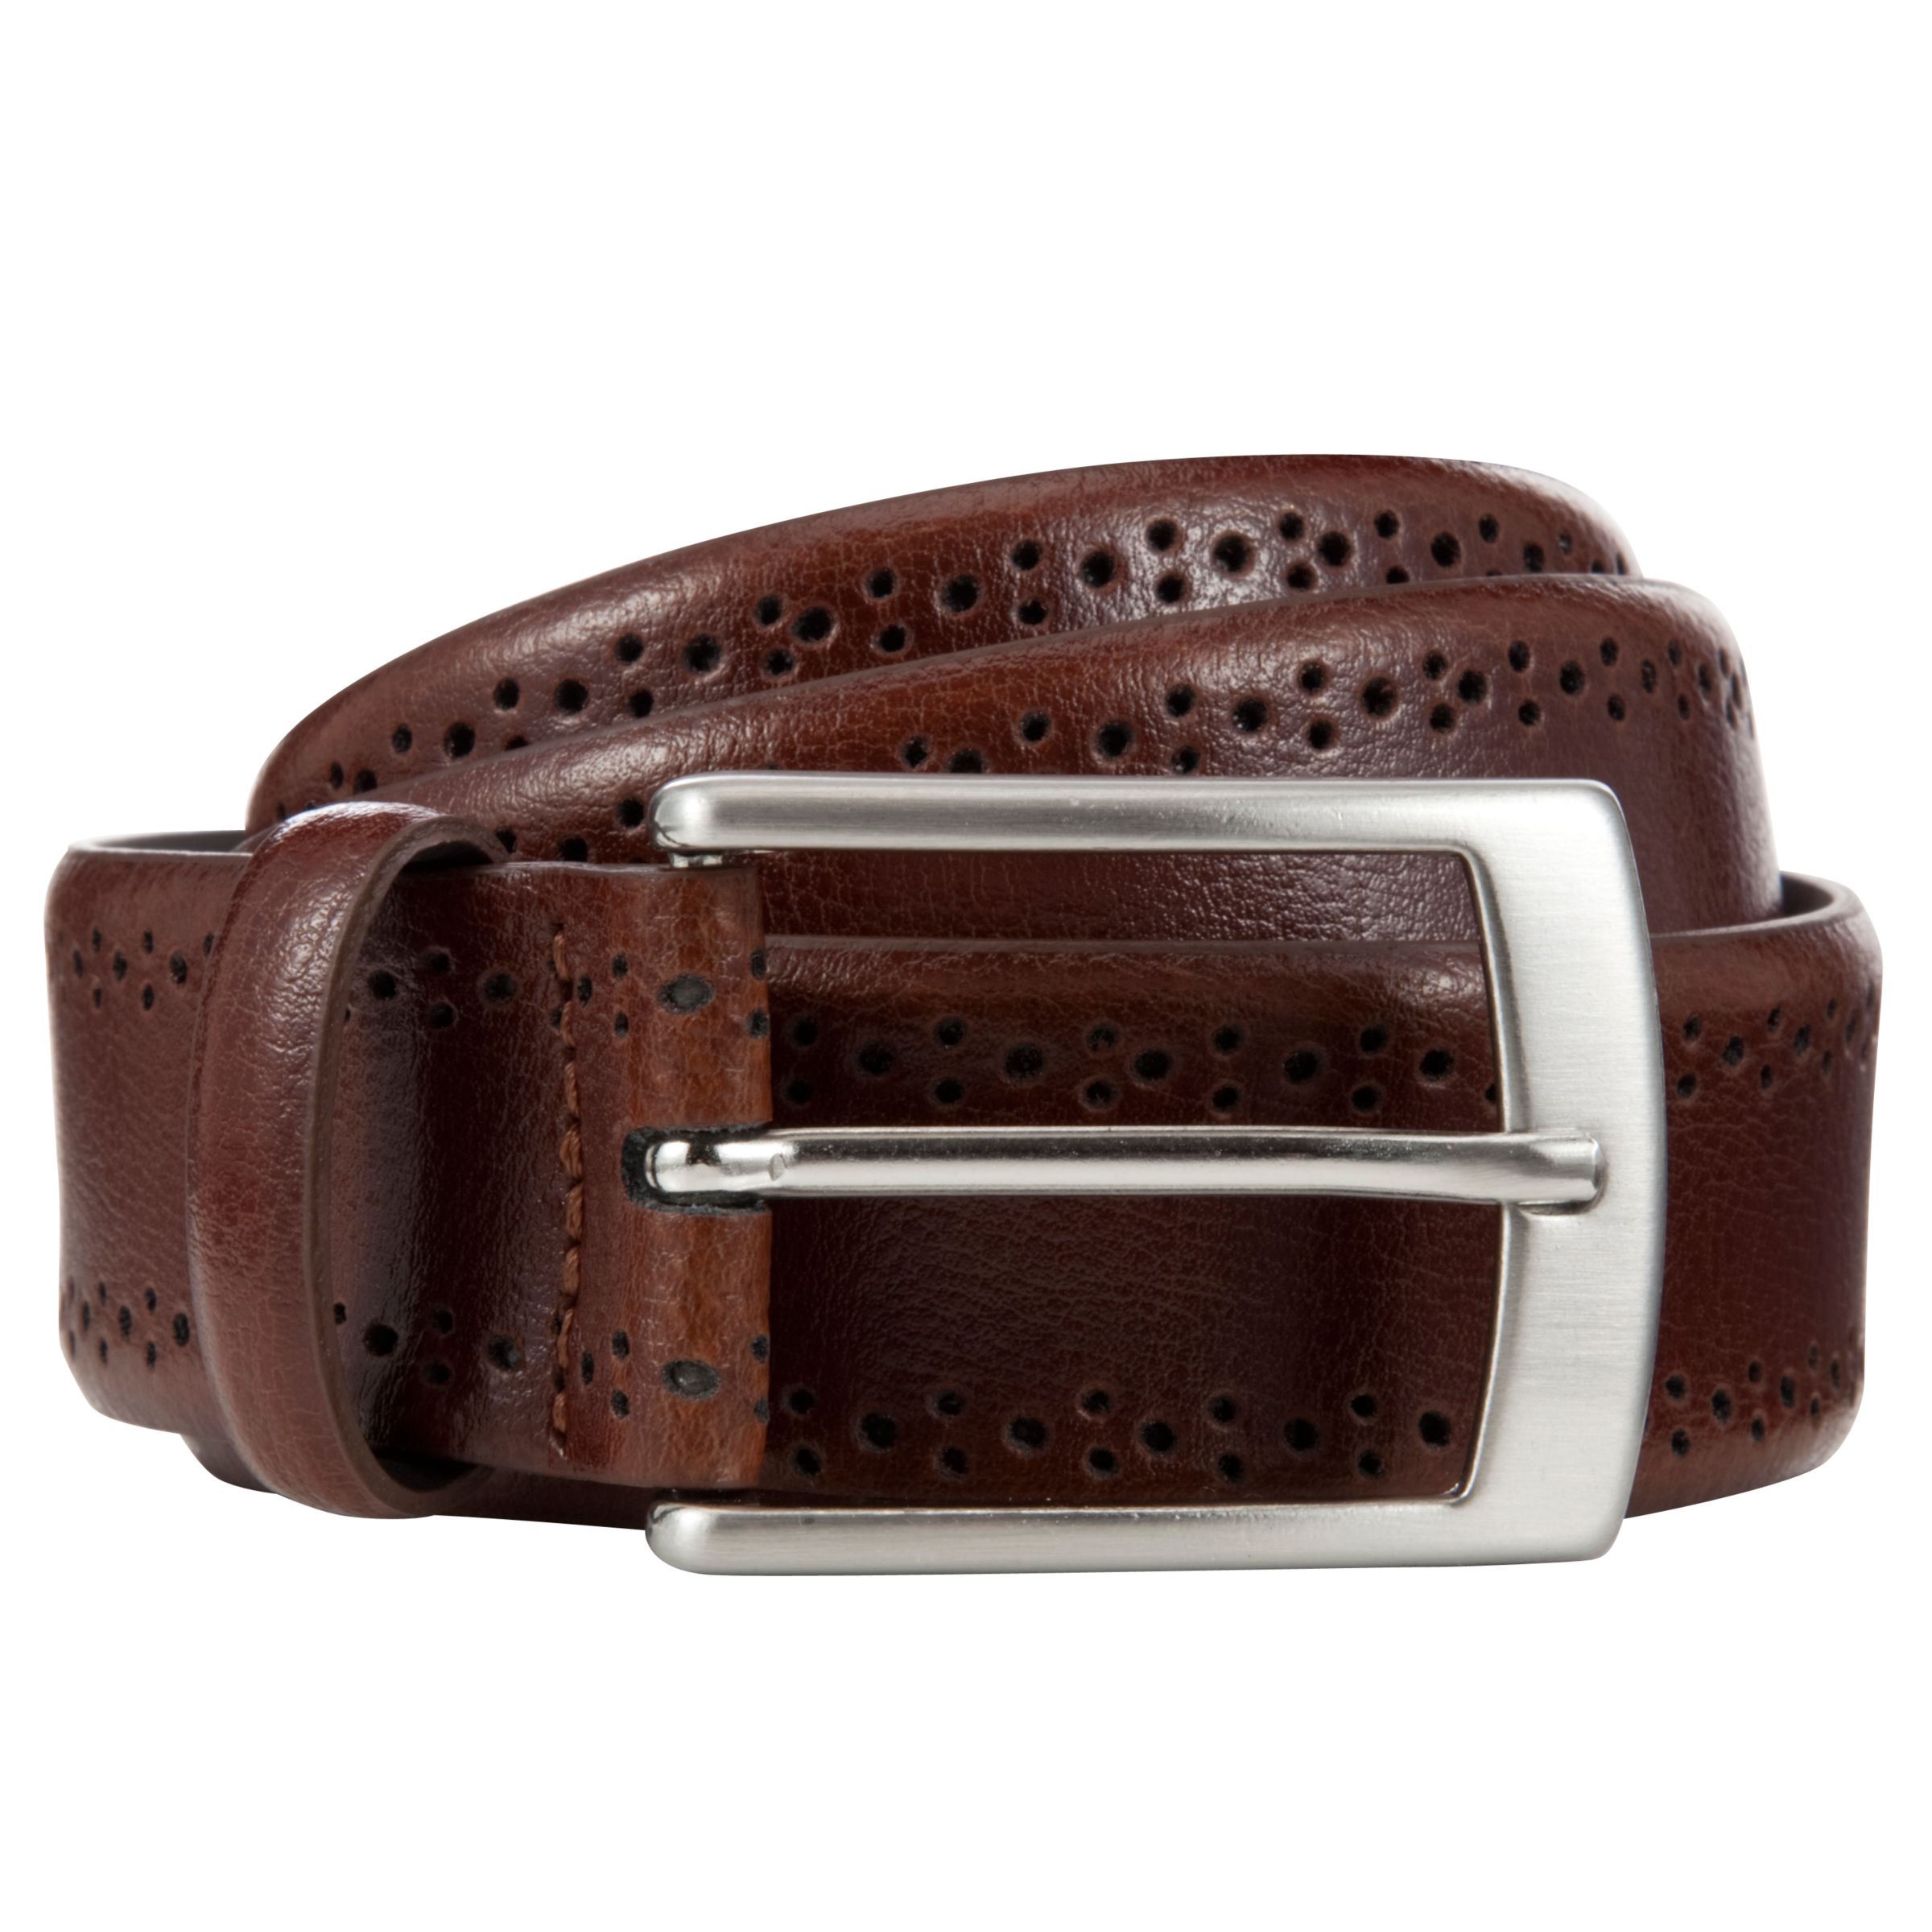 John Lewis & Partners Made In Italy Brogue Belt, Brown, S